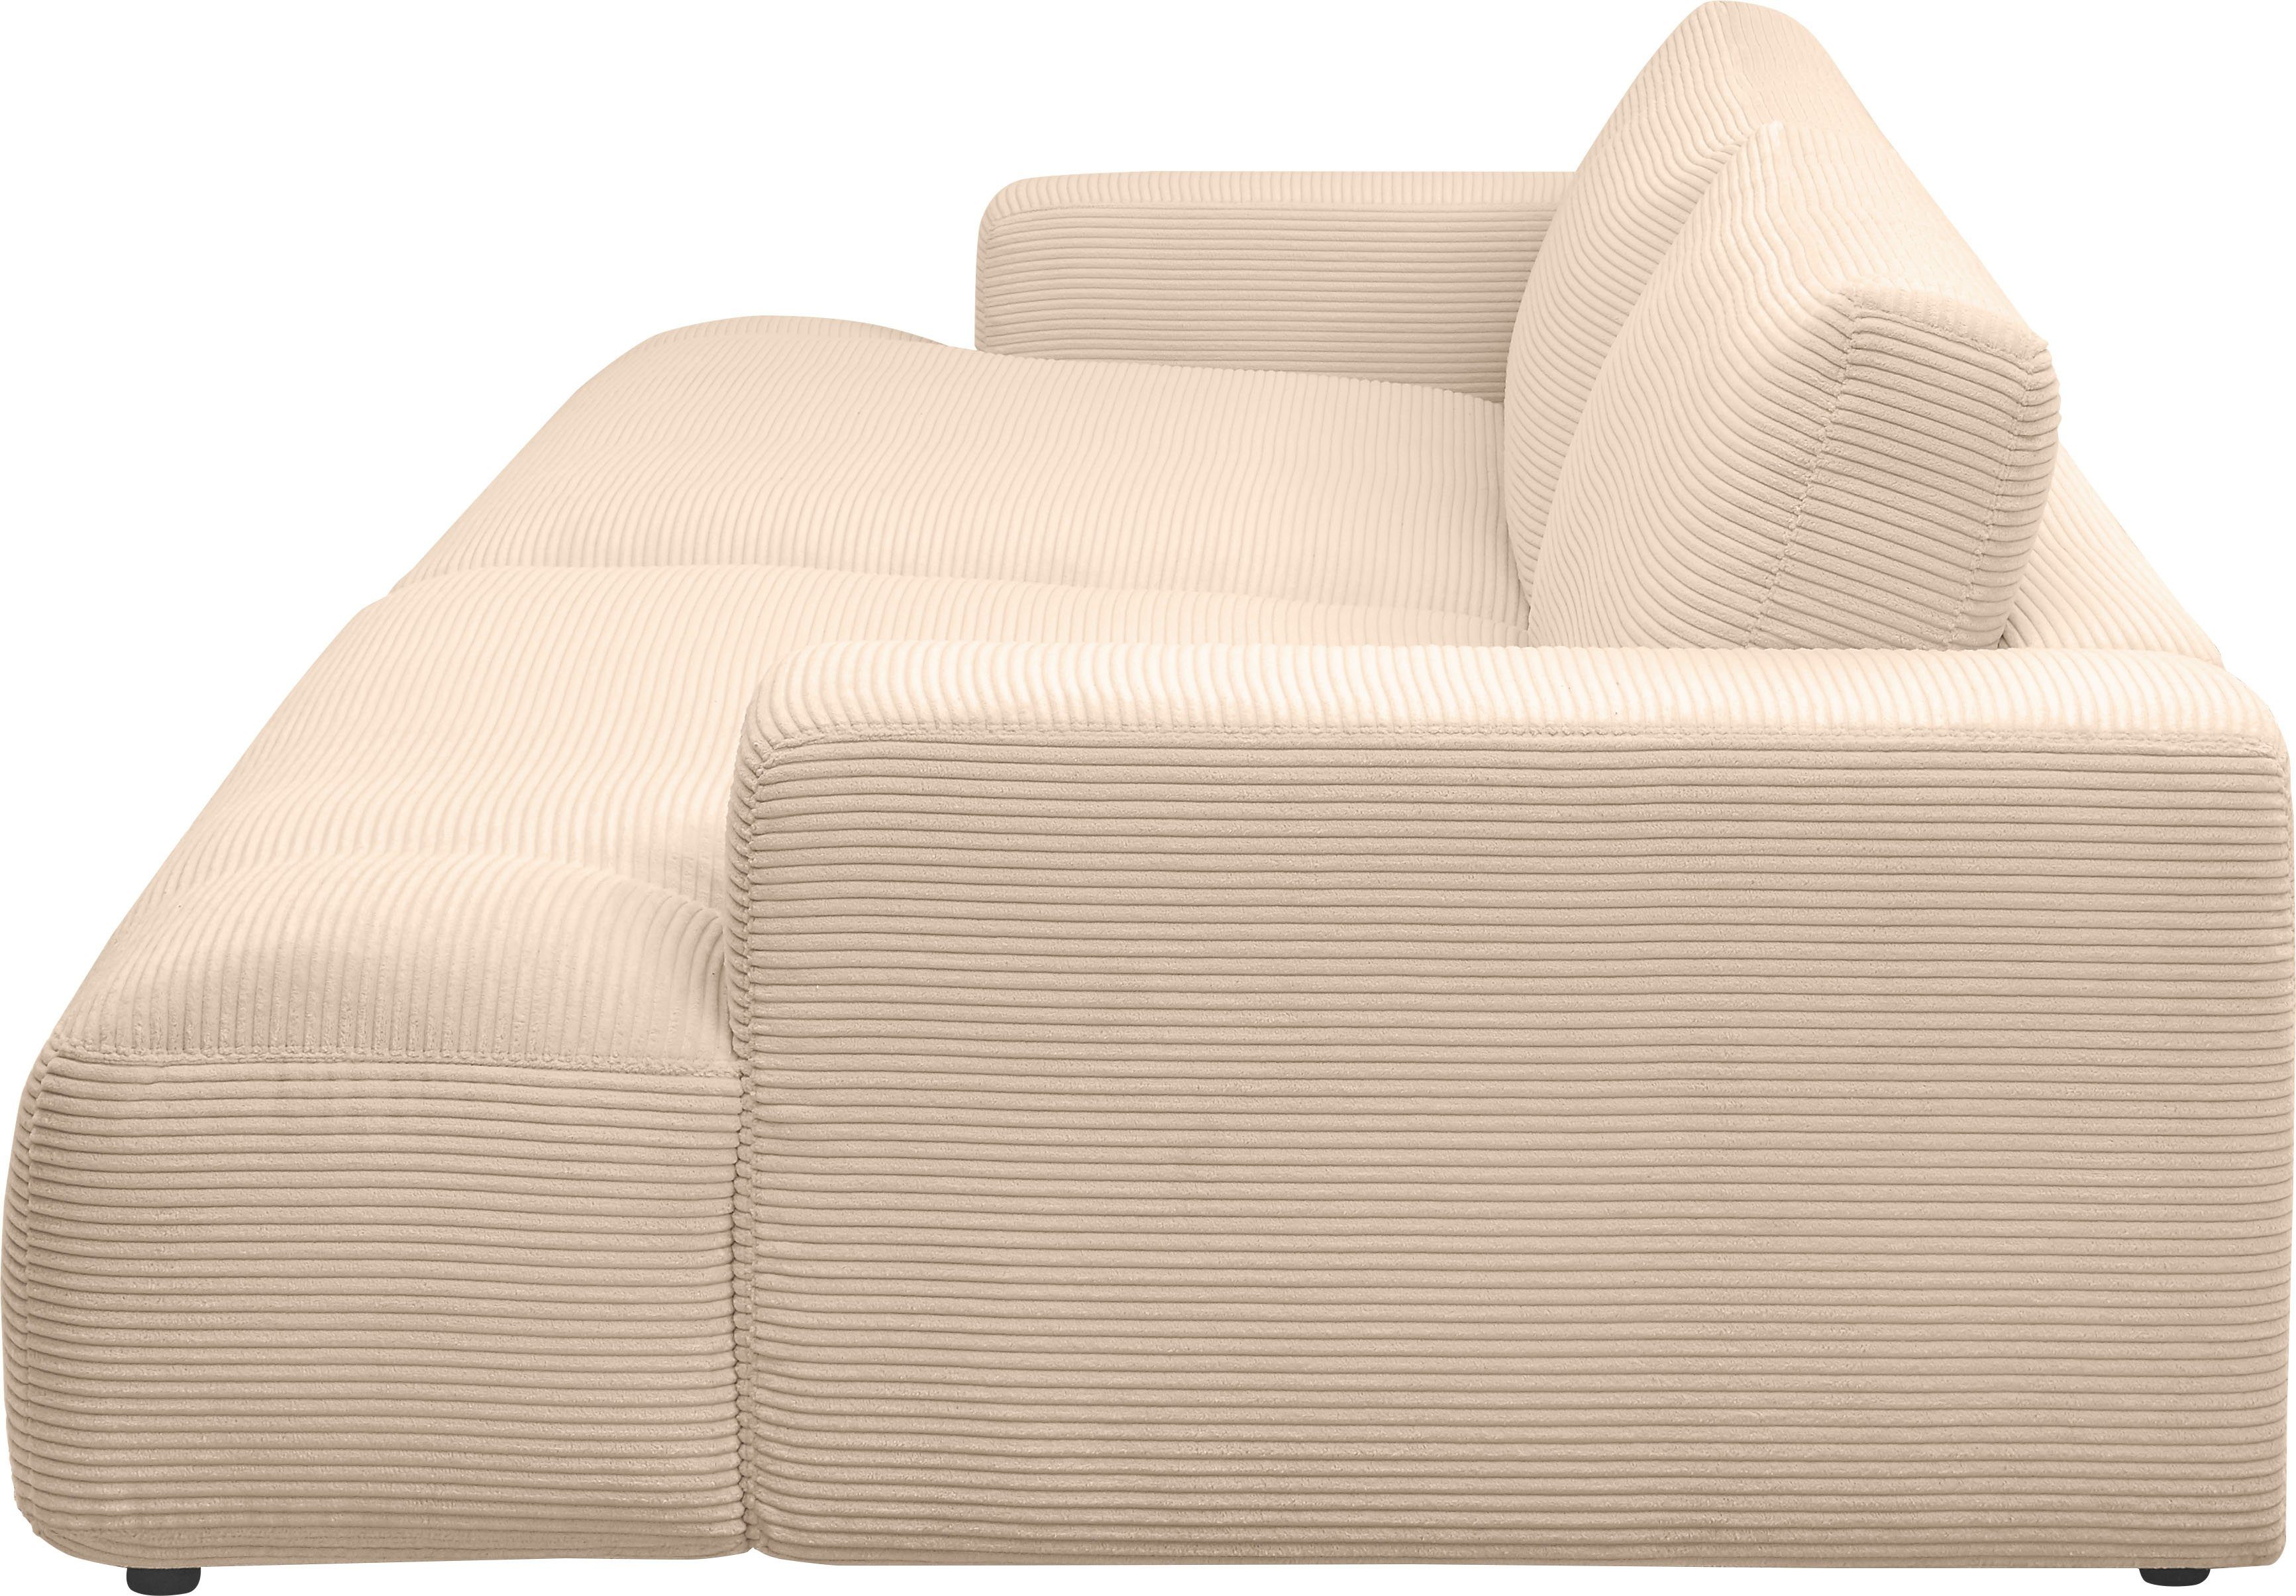 Lucia, M 292 Breite nature GALLERY branded cm Loungesofa Musterring by Cord-Bezug,